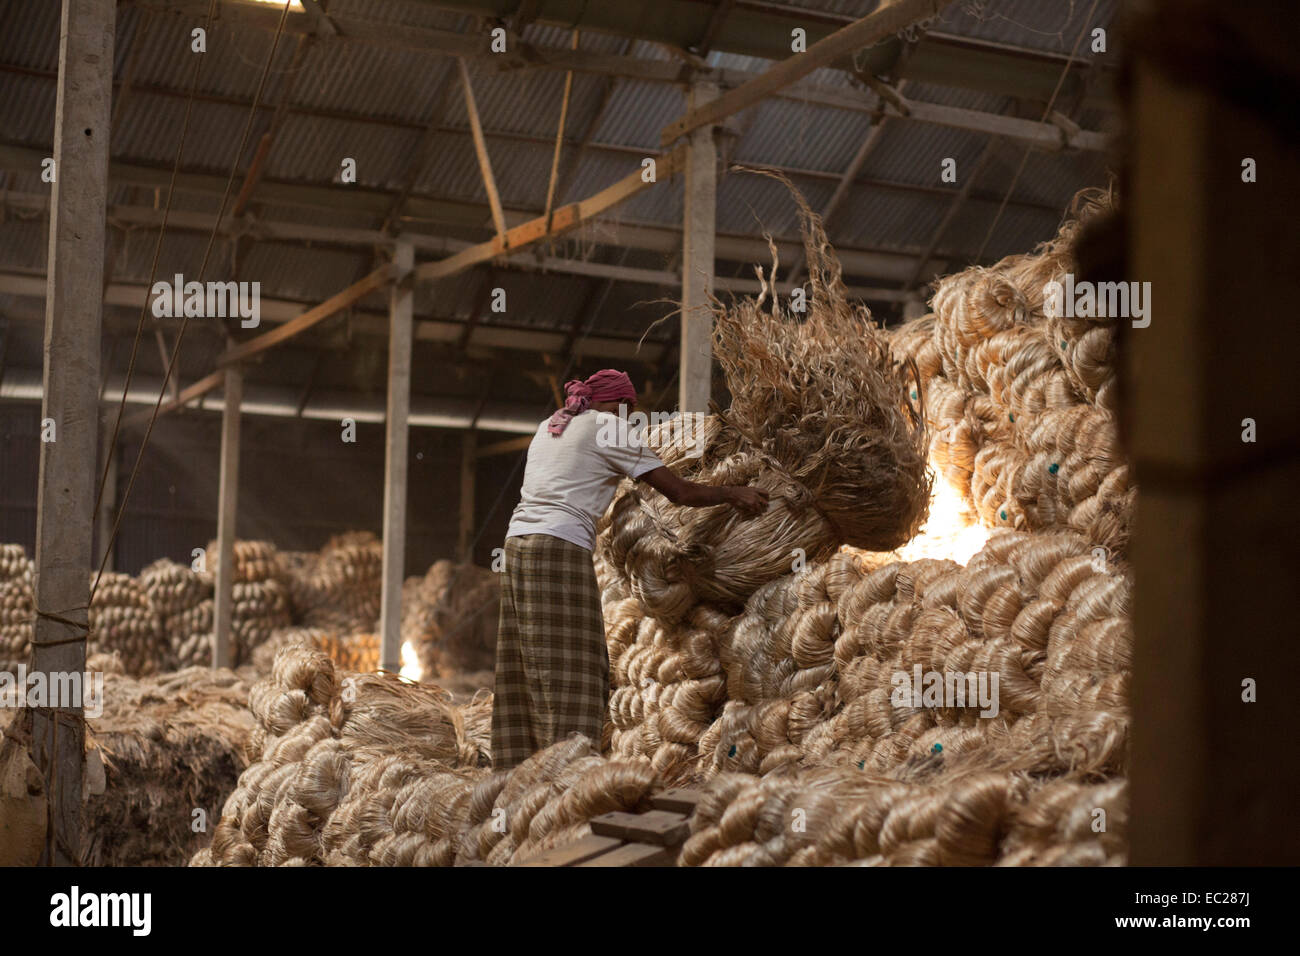 Dhaka, Bangladesh. 08th Dec, 2014. Bangladeshi labor working inside jute godown in Munshigonj outskirts of Dhaka. Bangladesh is the world's largest producer of jute, a fibrous substance used in making burlap, sacks, mats, rope and twine, and carpet backing. Jute is a vital sector from economical, agricultural, industrial, and commercial point of view in Bangladesh. Once upon a time jute was called the ‘Golden Fibre’ of Bangladesh.  and growth of this industry is in a vulnerable condition. Credit:  zakir hossain chowdhury zakir/Alamy Live News Stock Photo